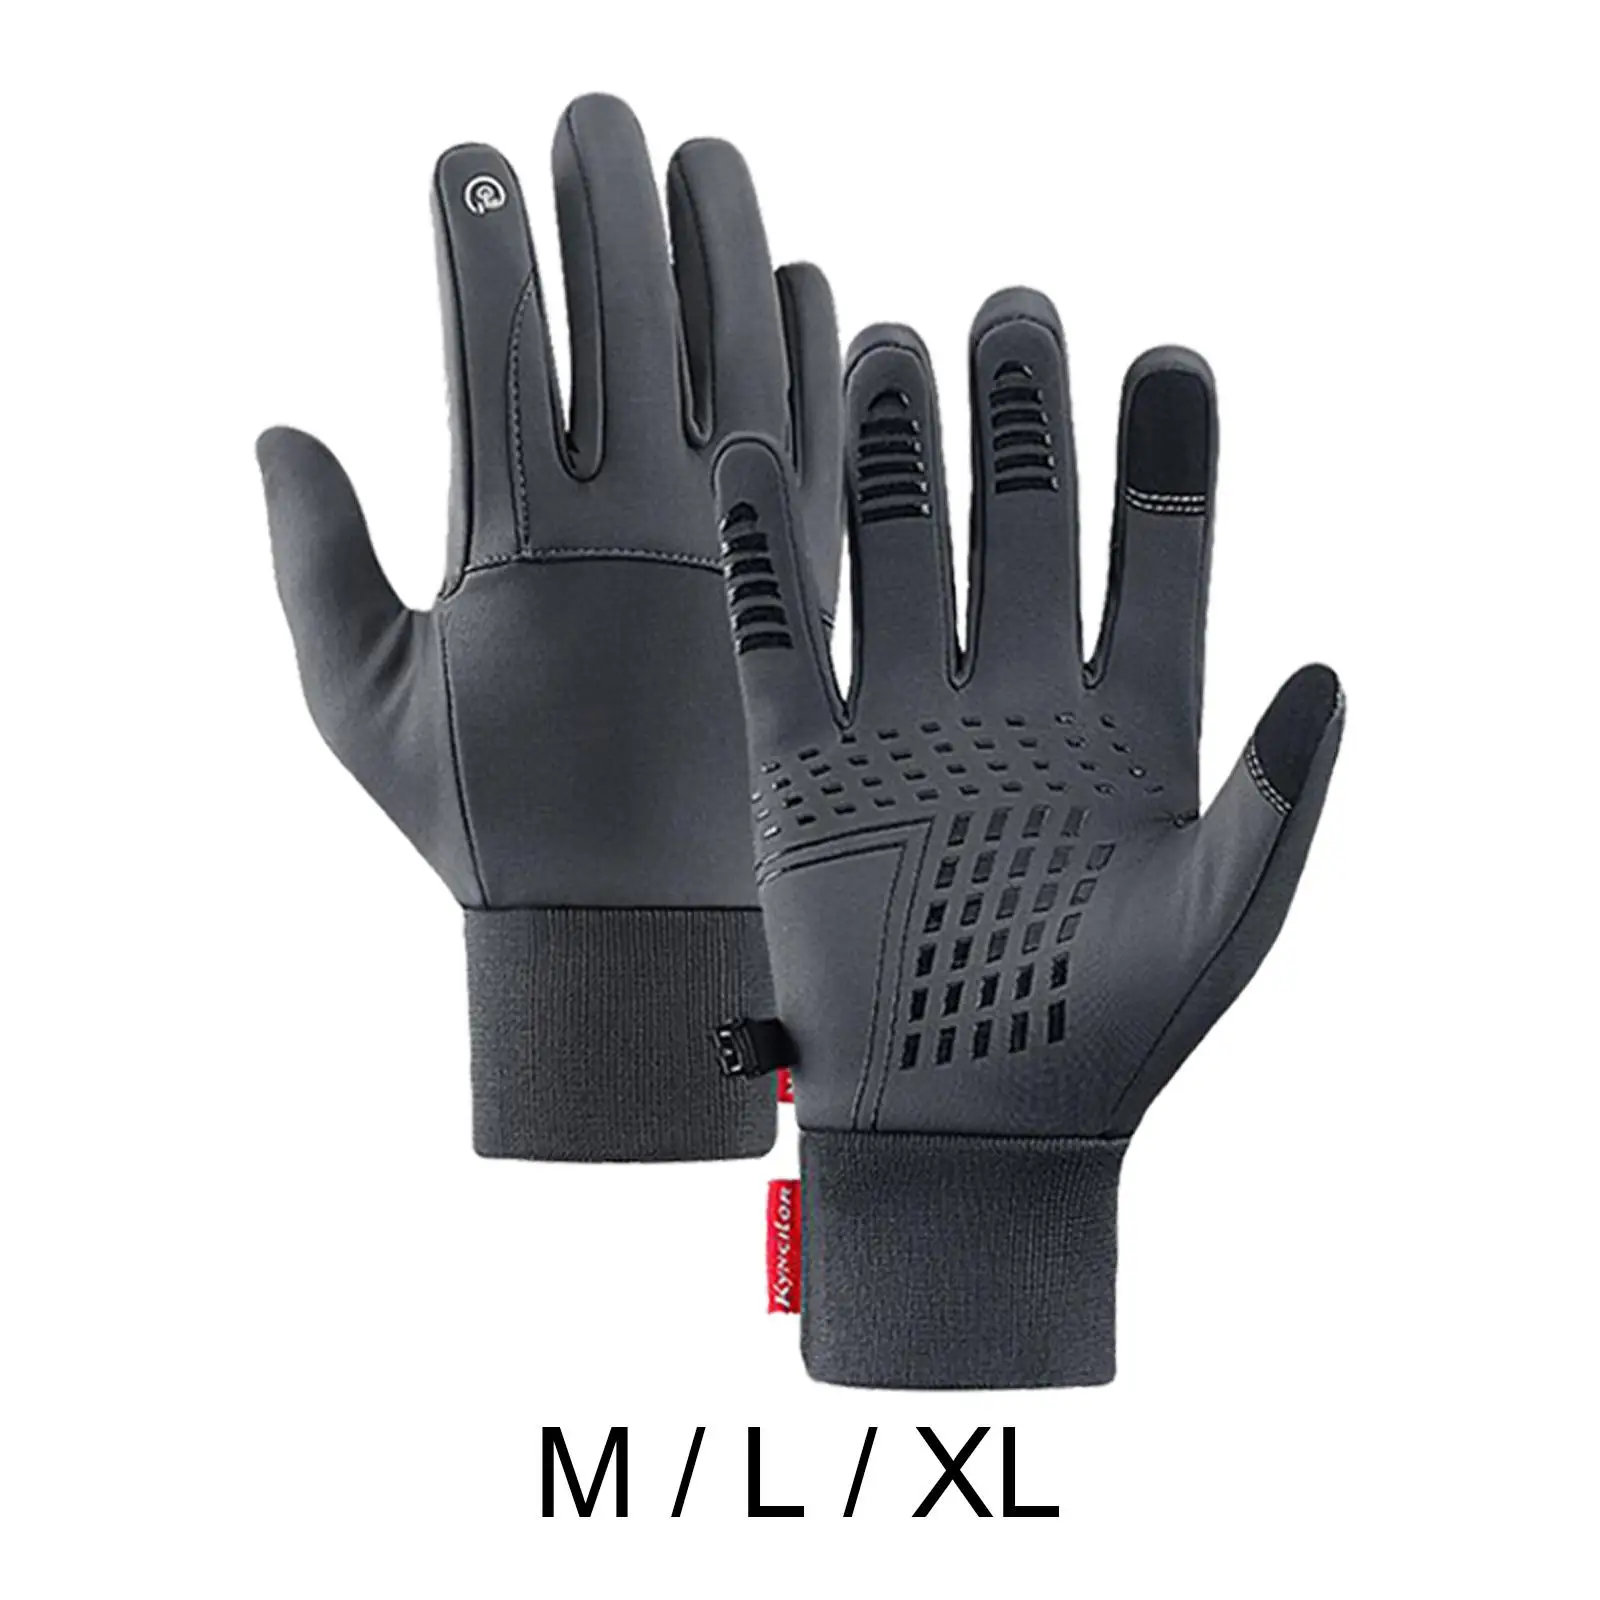 Winter Gloves Waterproof & Windproof Thermal  Winter Touch Screen Warm Gloves for Cycling, Riding, Running, Outdoor Sports